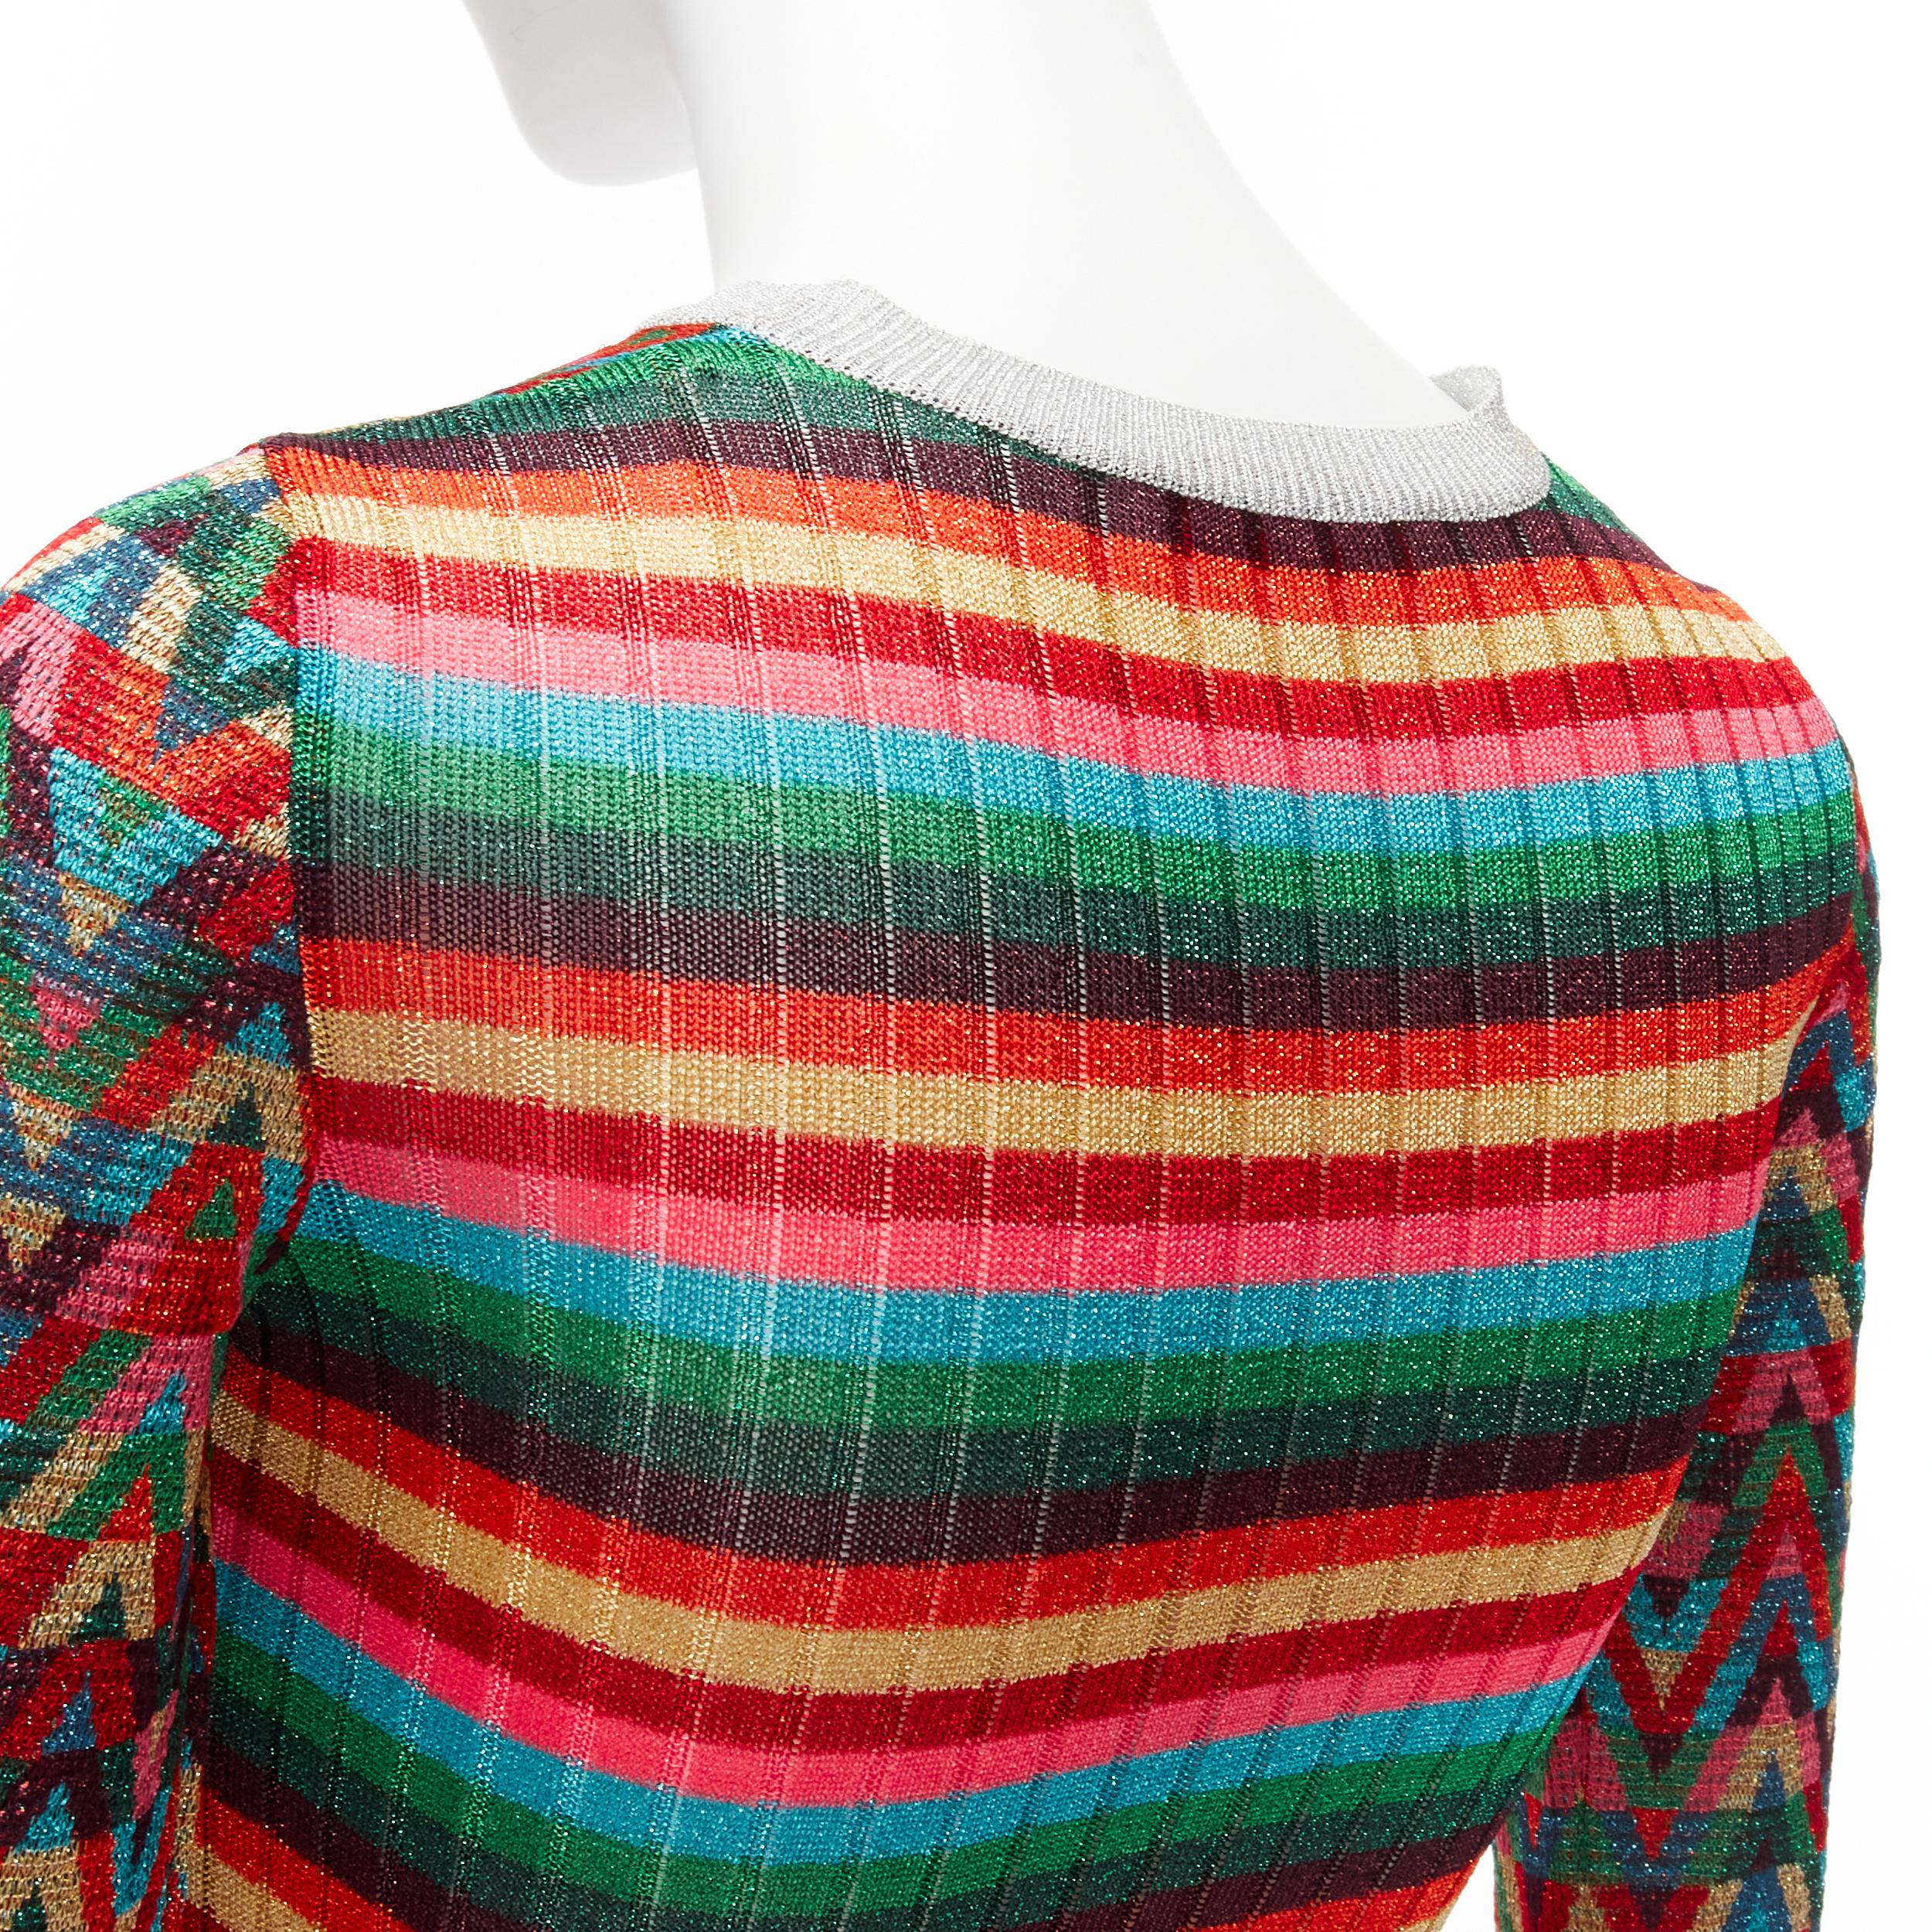 VALENTINO 2021 Optical VLOGO colorful lurex silver collar long sleeve sweater XS
Reference: AAWC/A00475
Brand: Valentino
Designer: Pier Paolo Piccioli
Collection: VLOGO Optical
Material: Viscose, Blend
Color: Multicolour
Pattern: Monogram
Closure: